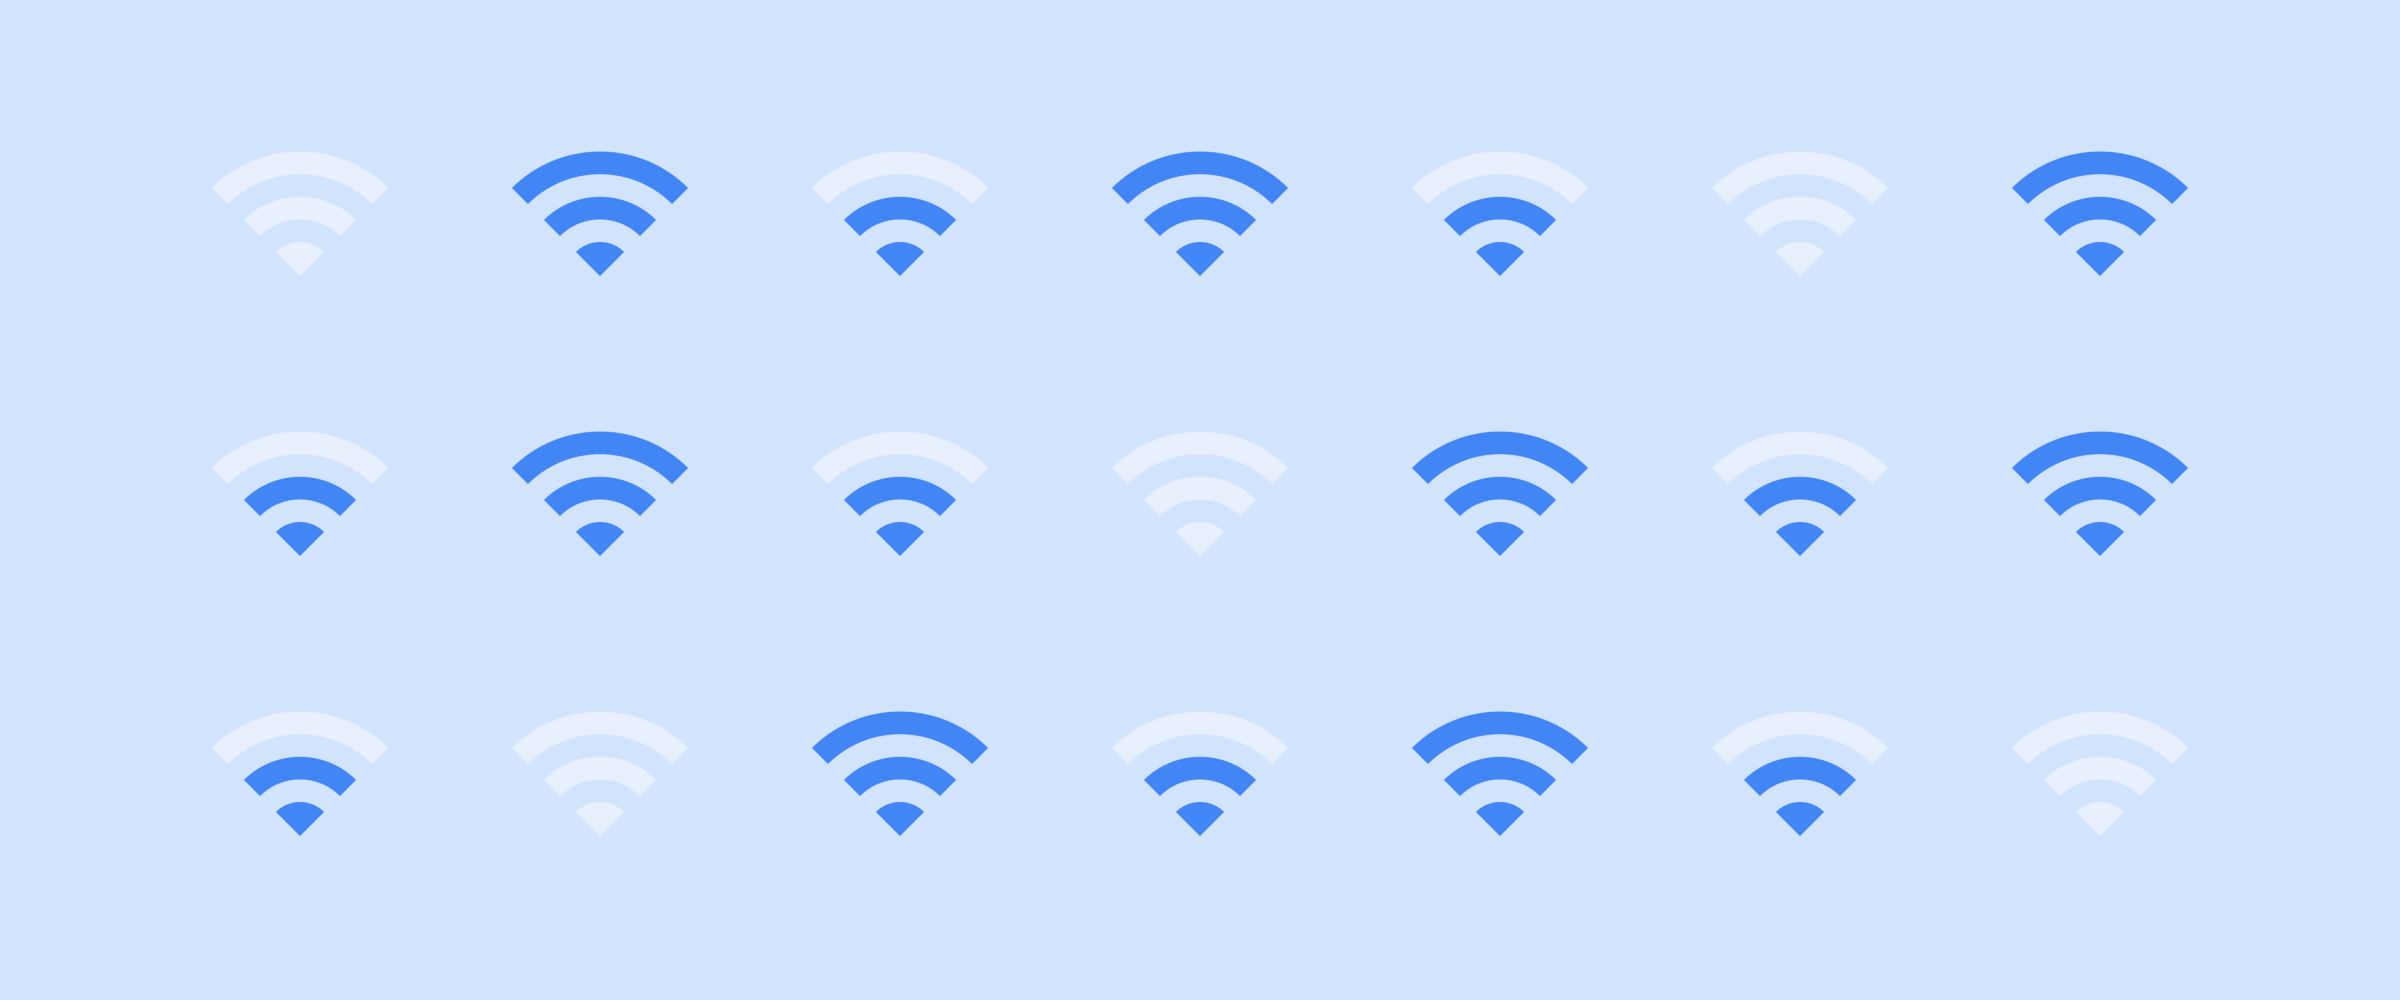 What is Wi-Fi?